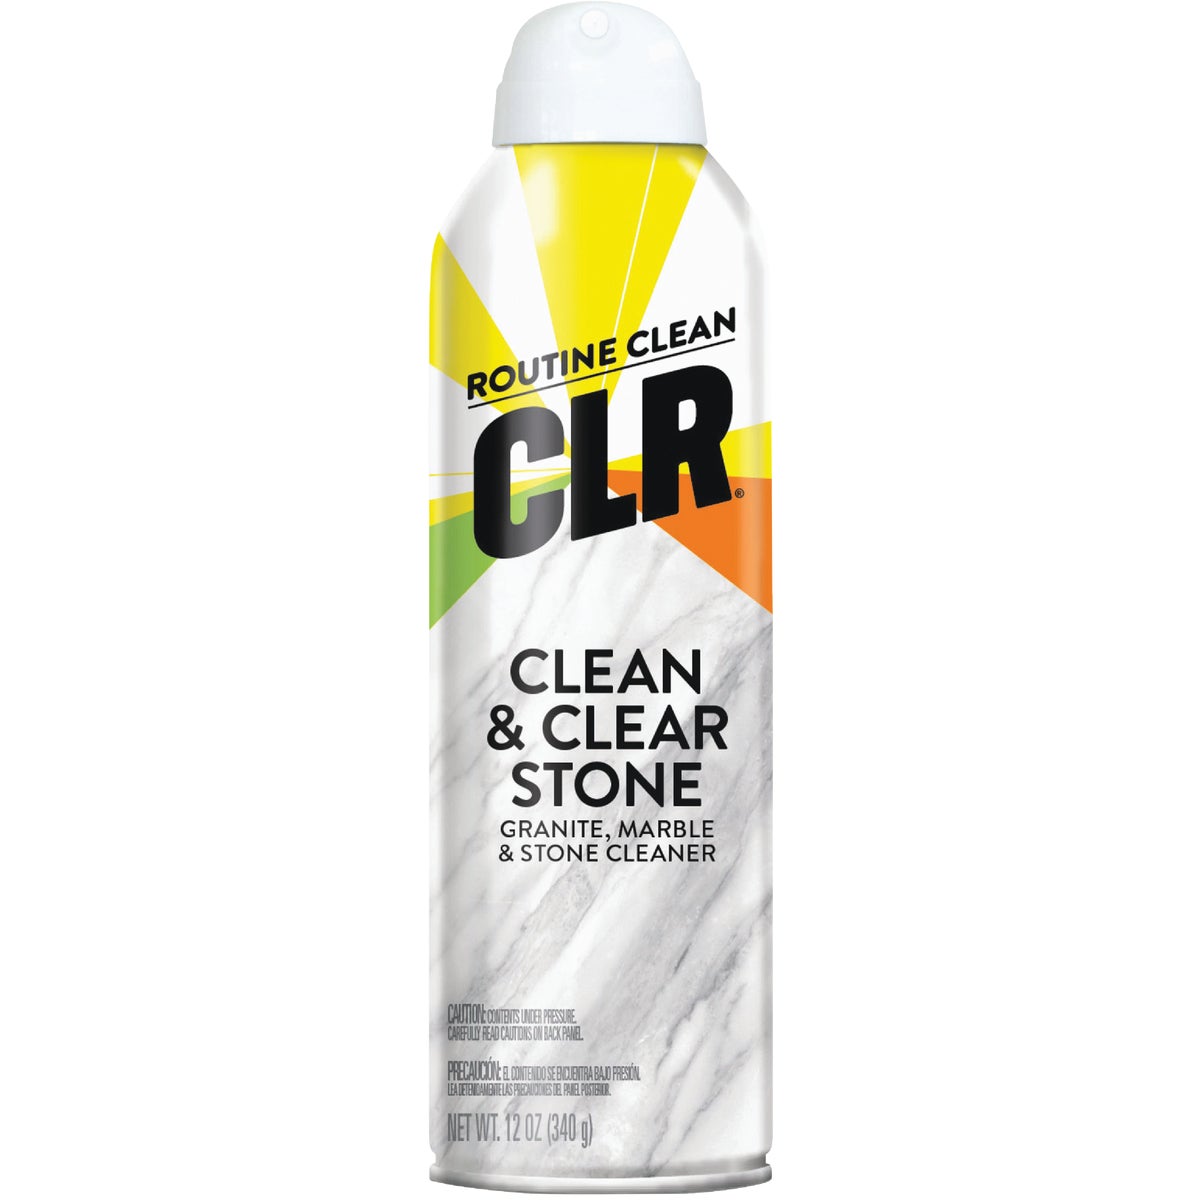 Item 612235, Aerosol CLR stone cleaner for use with granite, marble, stone Corian, tile